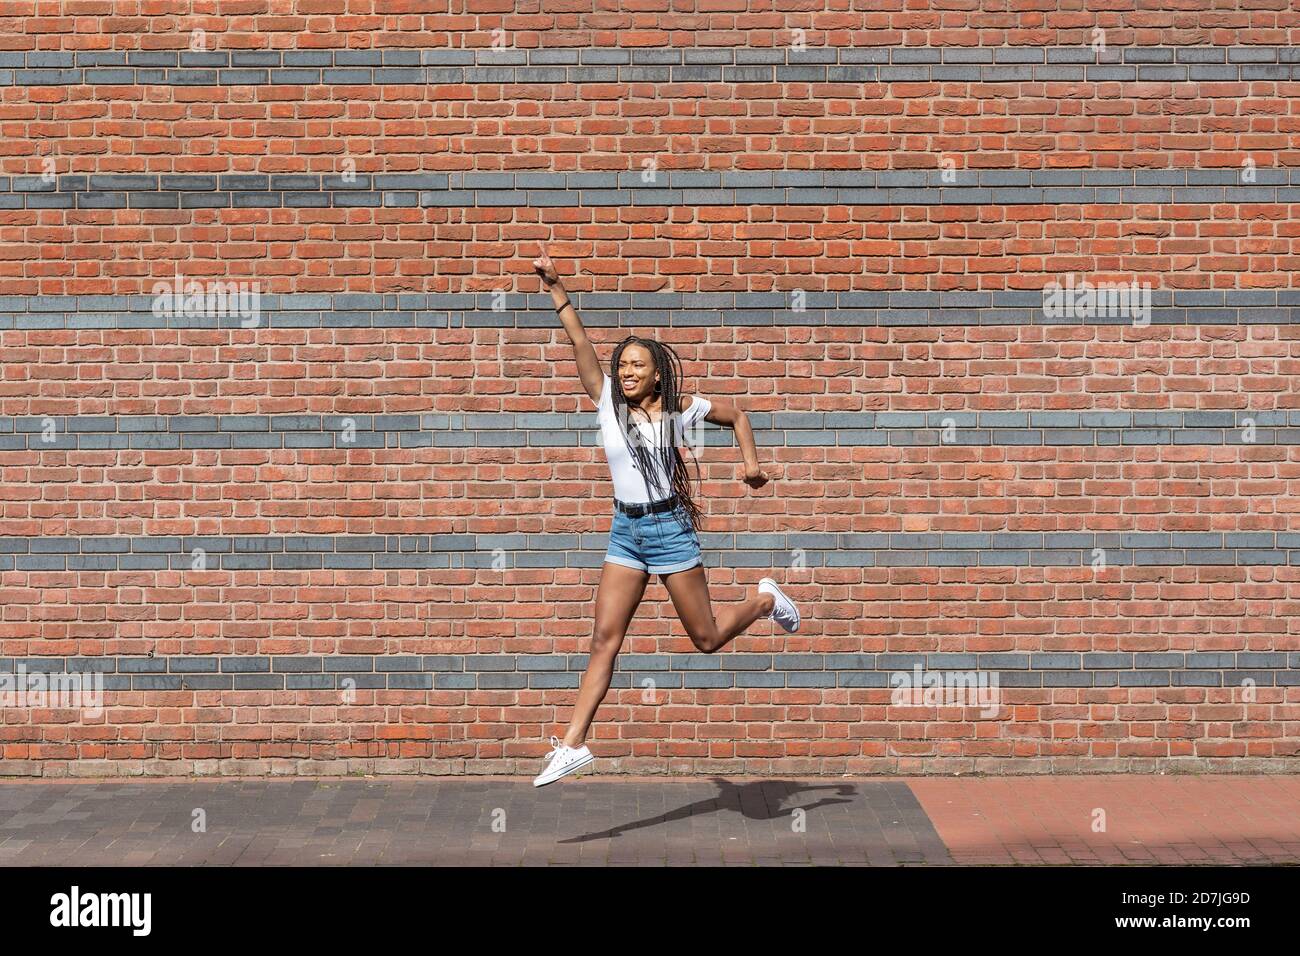 Young woman smiling while jumping against brick wall Stock Photo